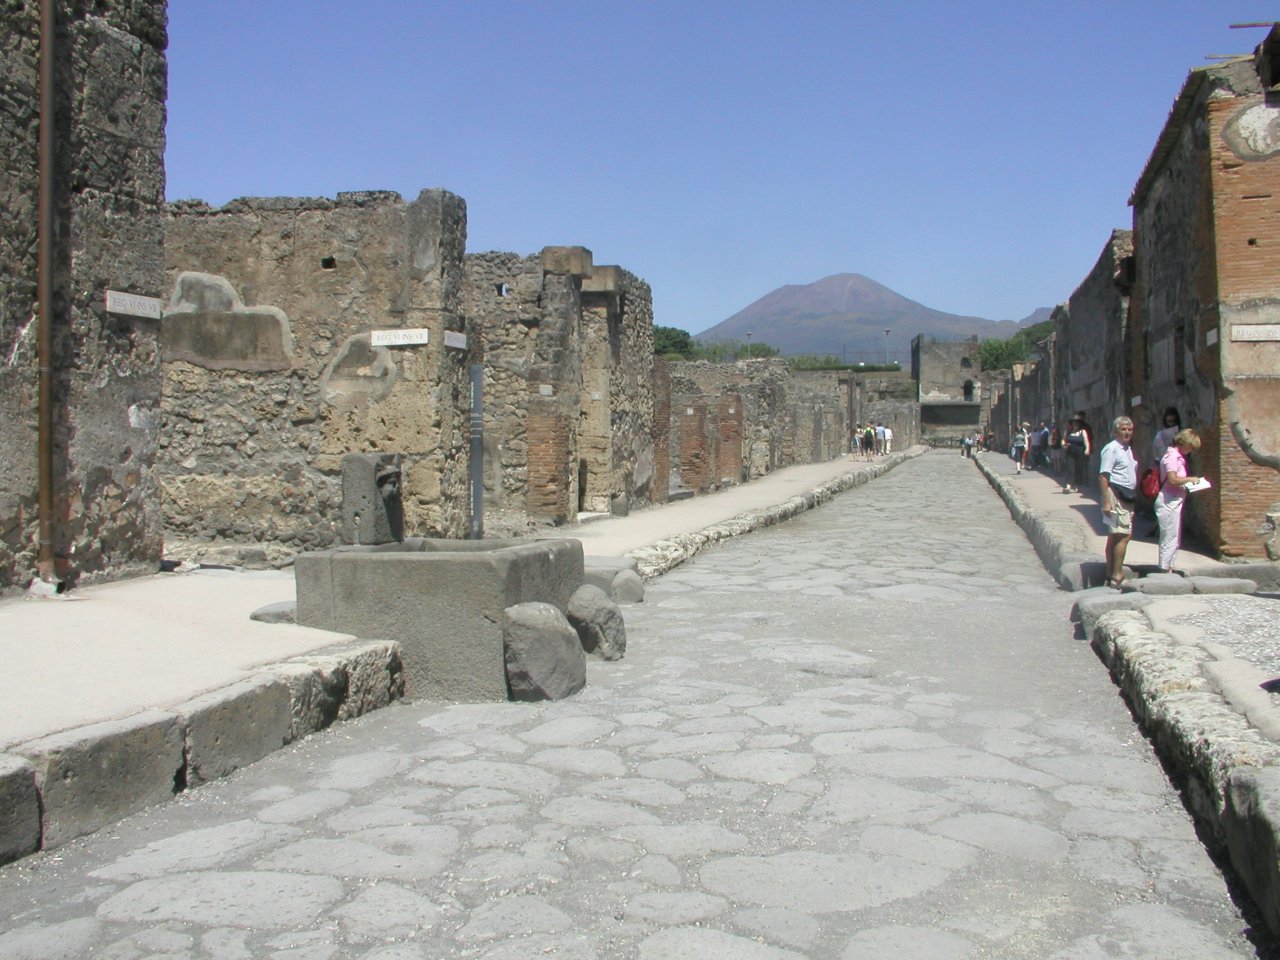 JPEG image - Pompei : One of the many excavated roads - with the ever present threat of Vesuvius in the background. ...